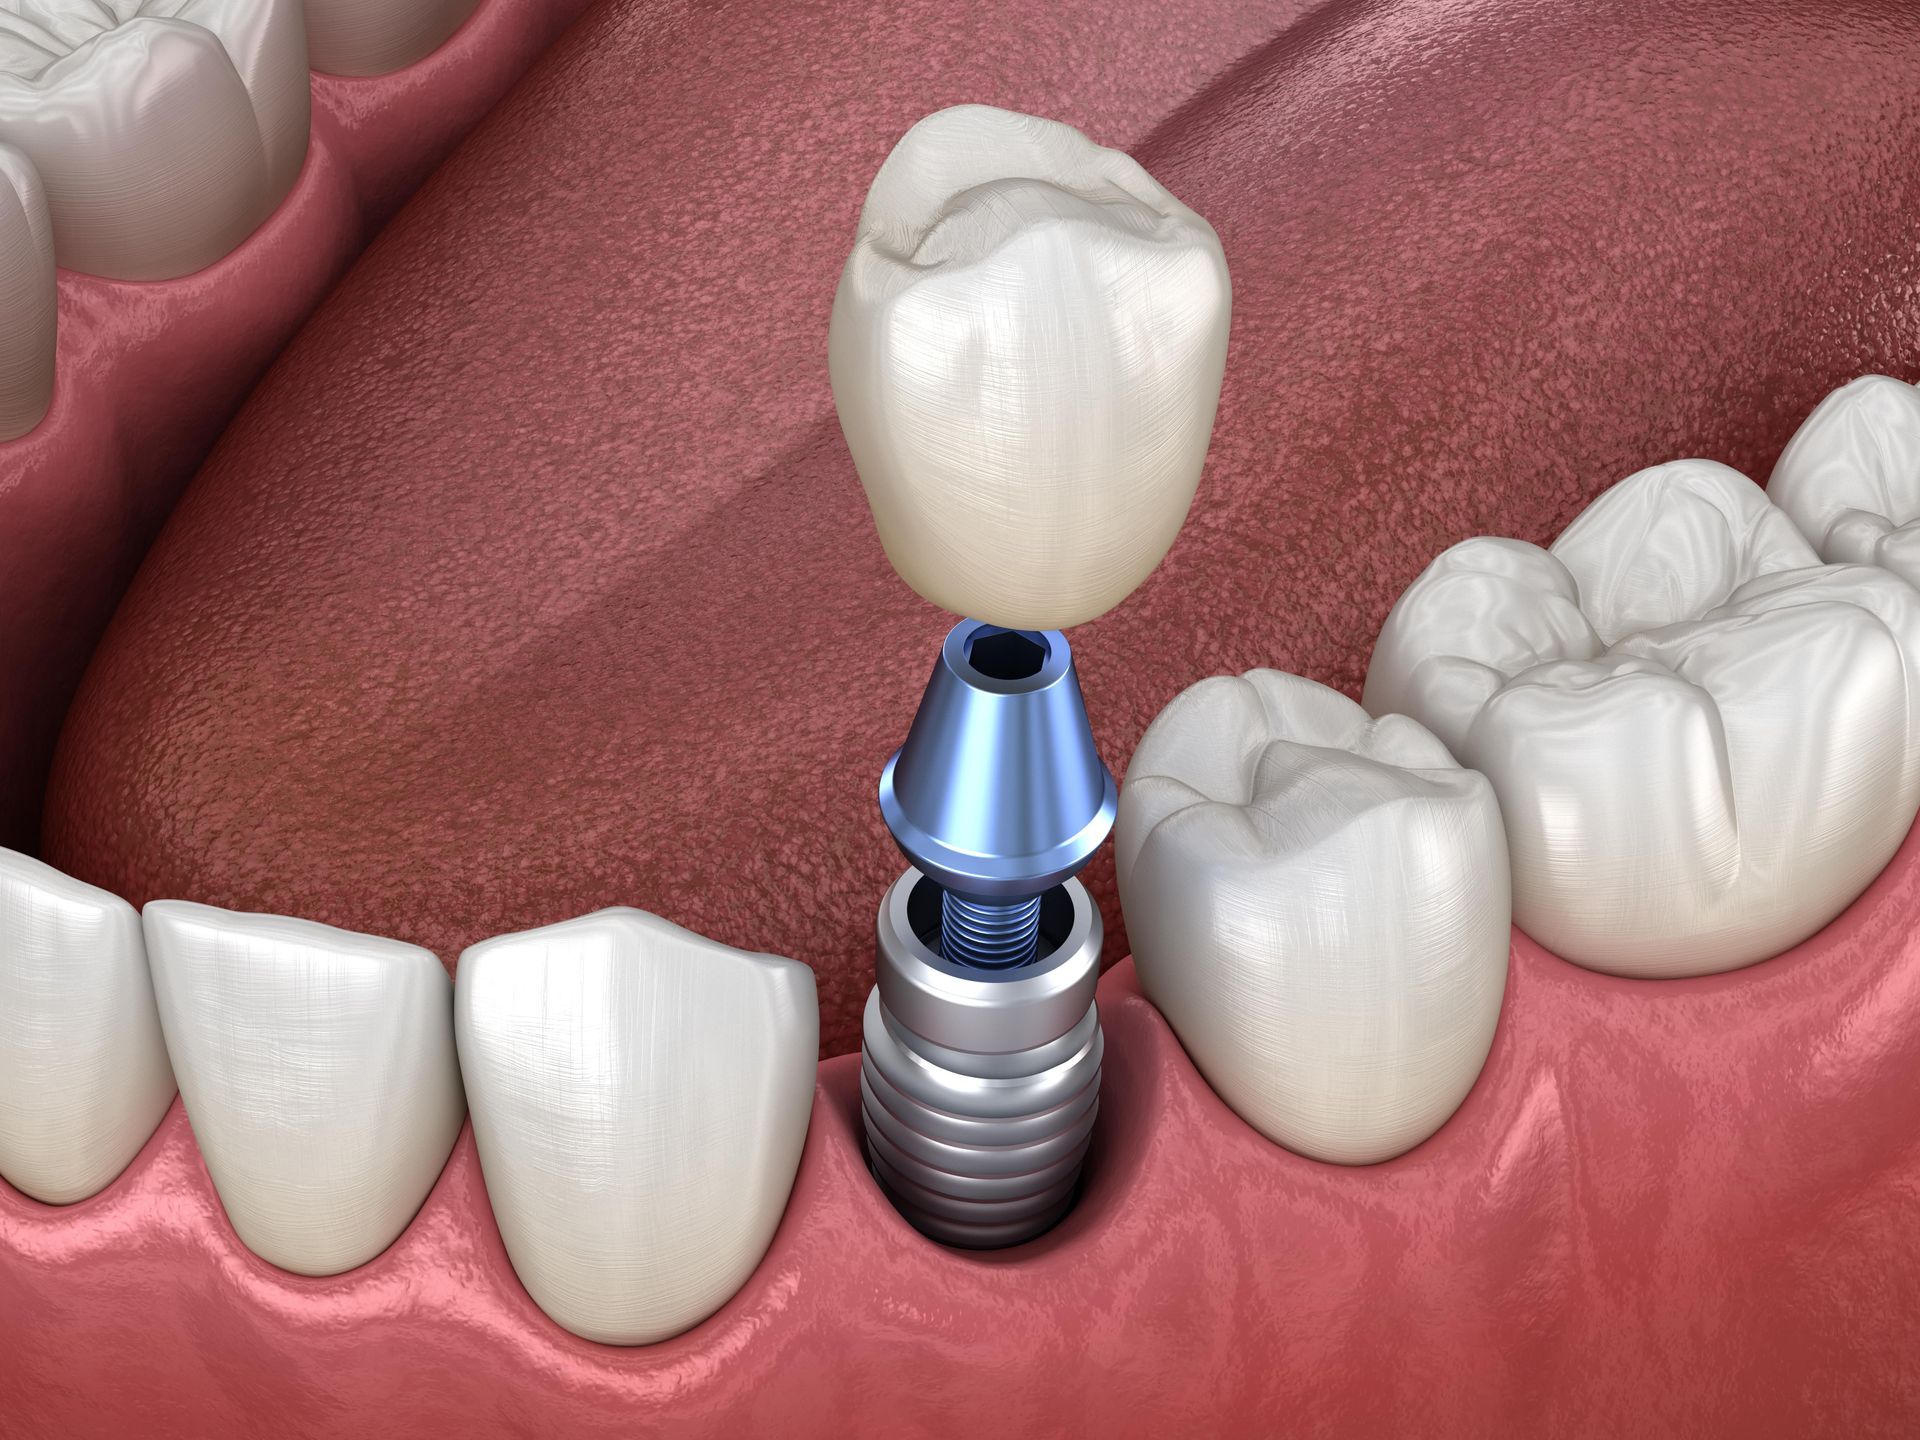 A computer generated image of a single tooth implant showing the implant, abutment, and crown